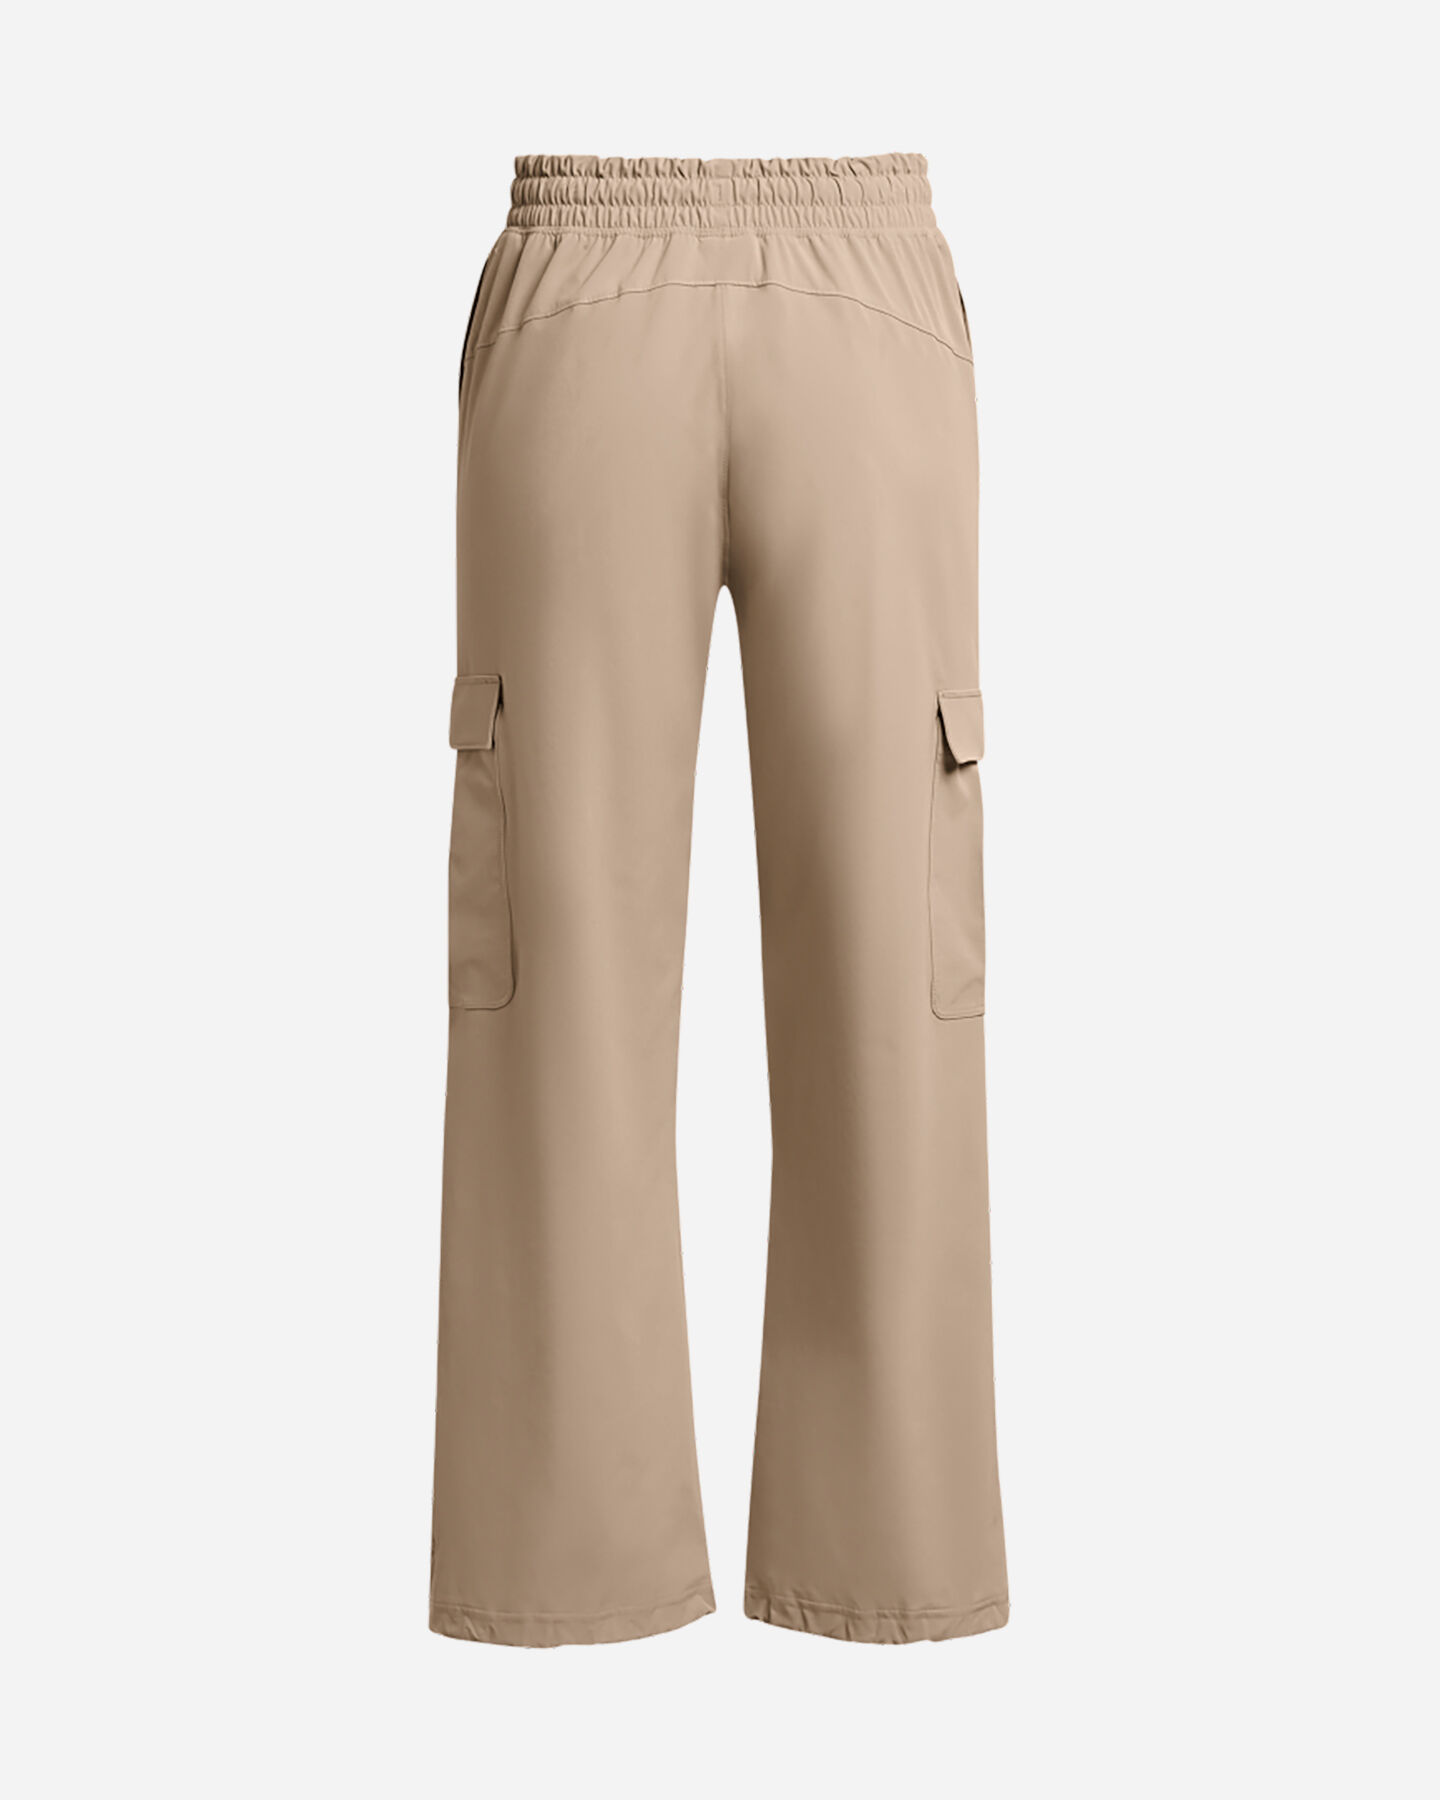  Pantalone UNDER ARMOUR WOVEN CARGO W S5641524|0203|XS scatto 1